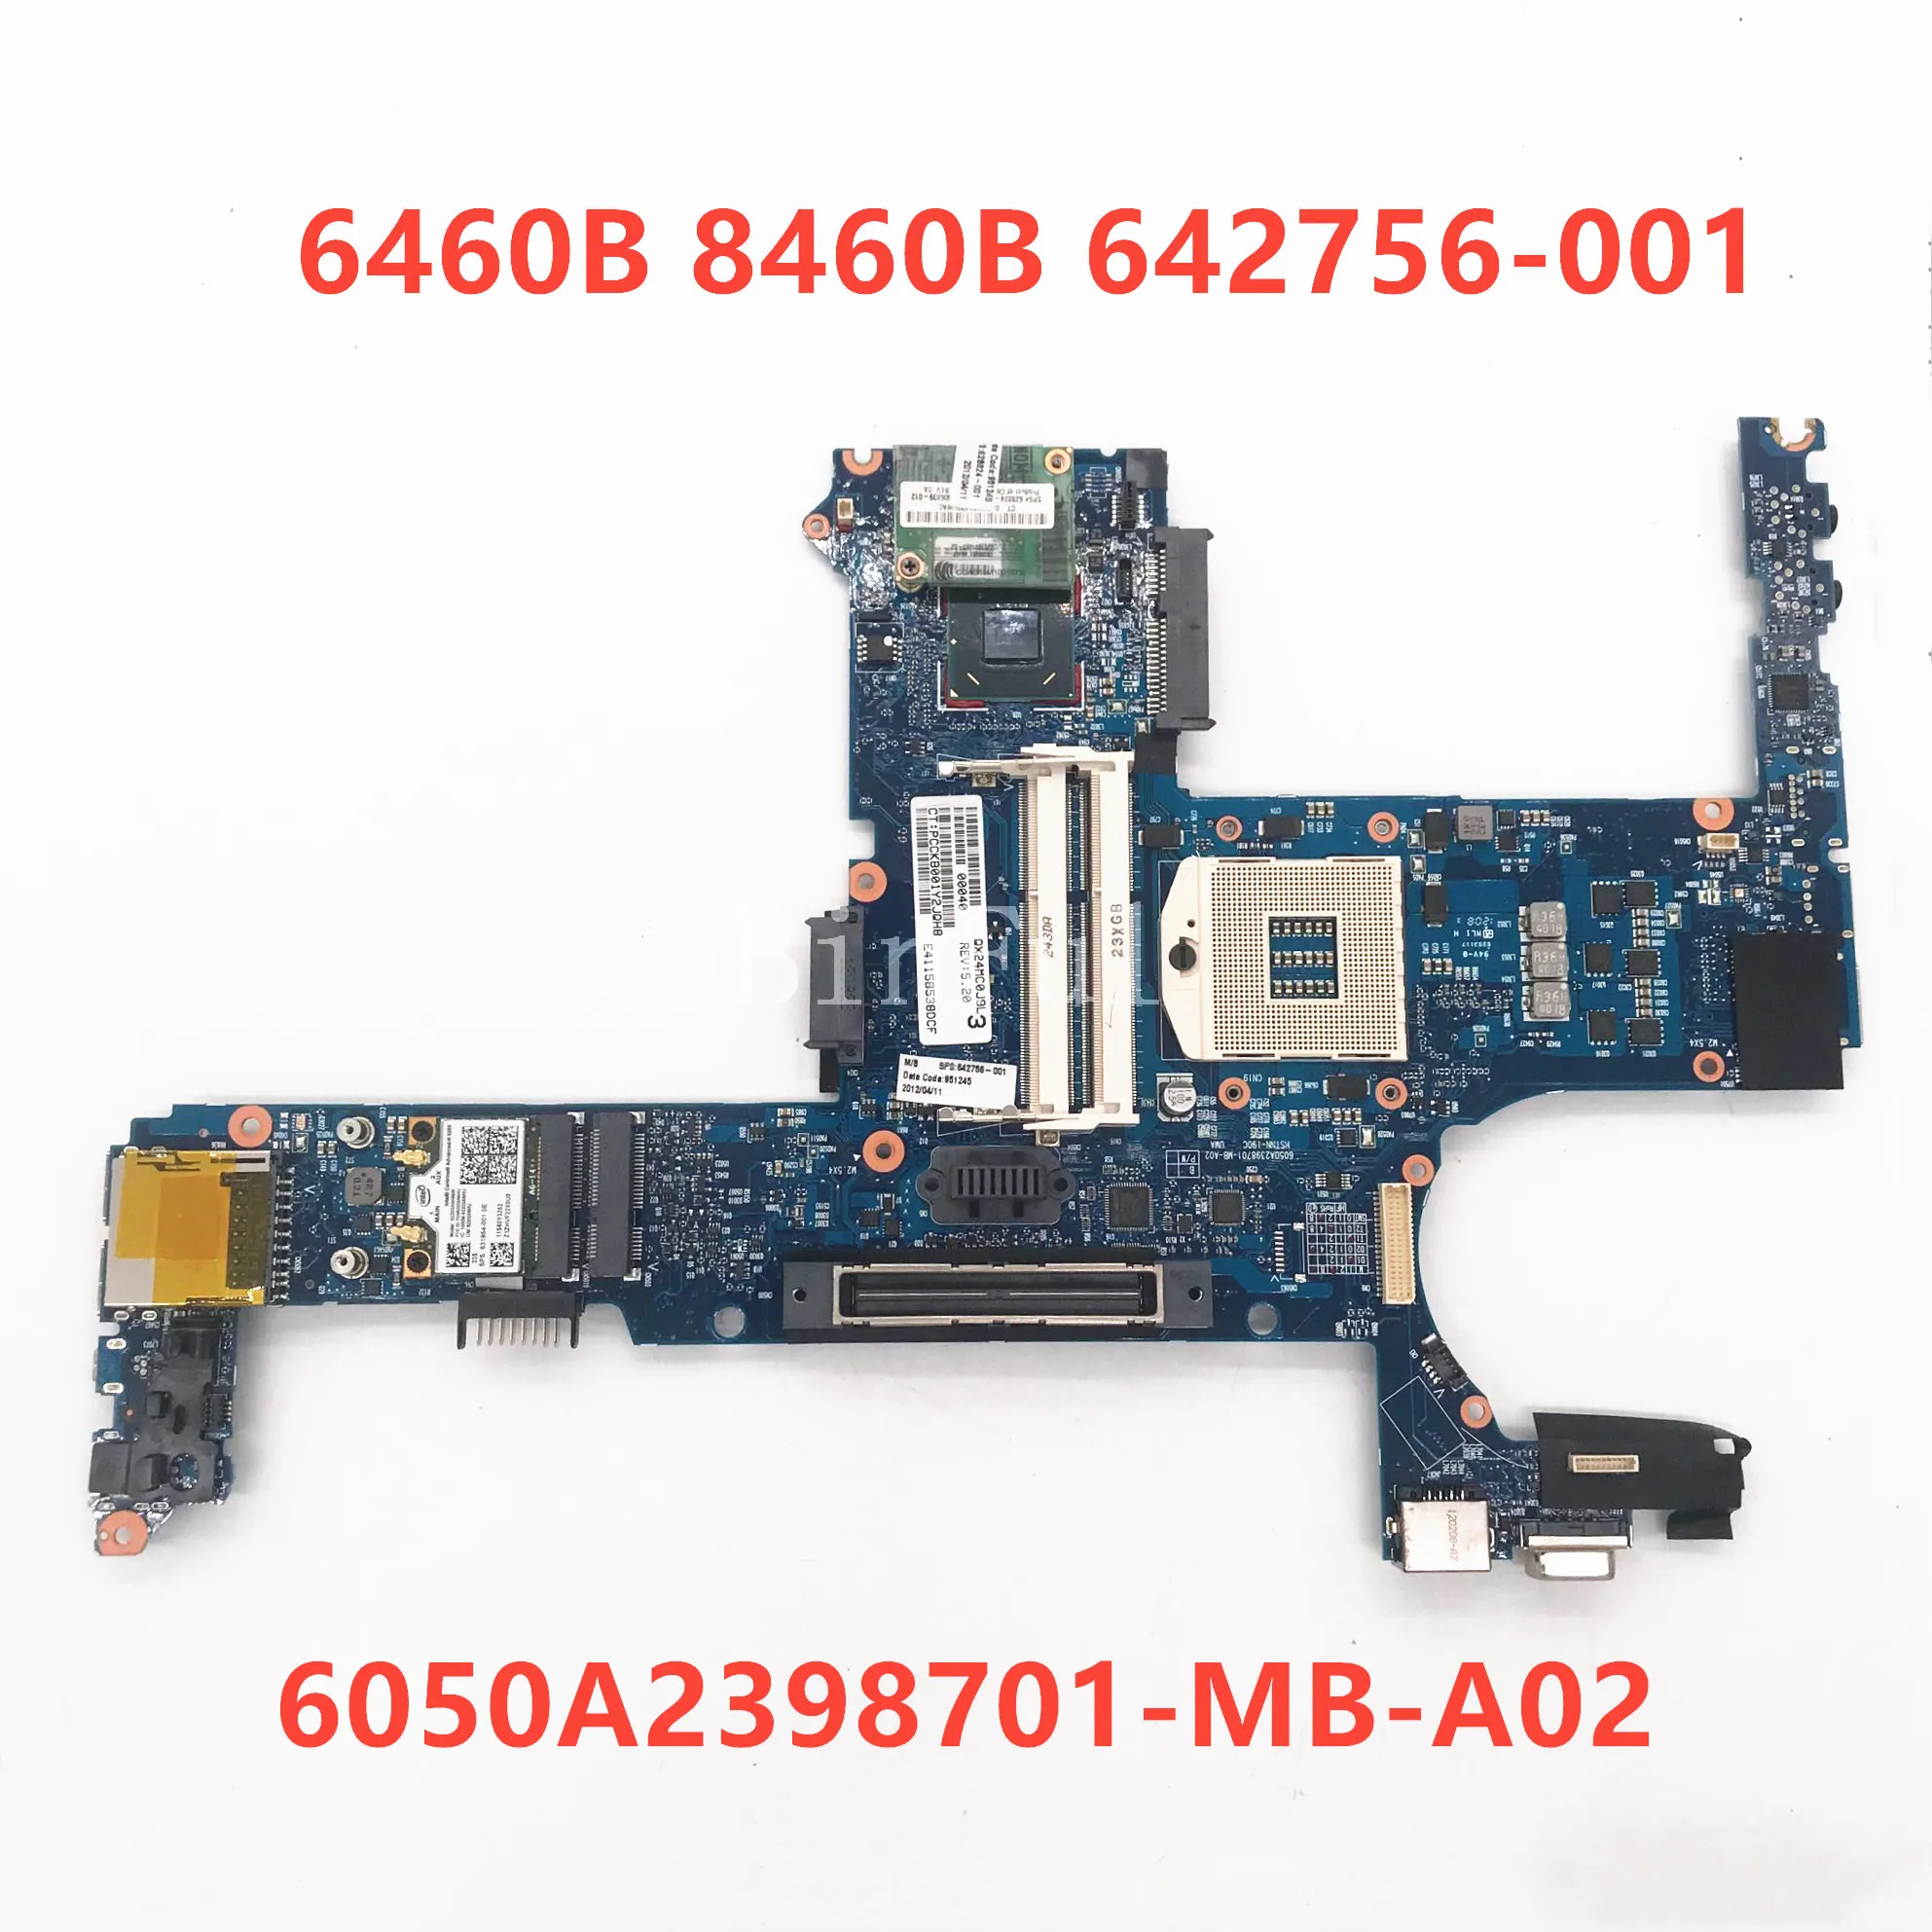 High Quality Mainboard For 8460P 6460B Laptop Motherboard 642756-001 642756-501 642756-601 6050A2398701-MB-A02 100% Full Tested